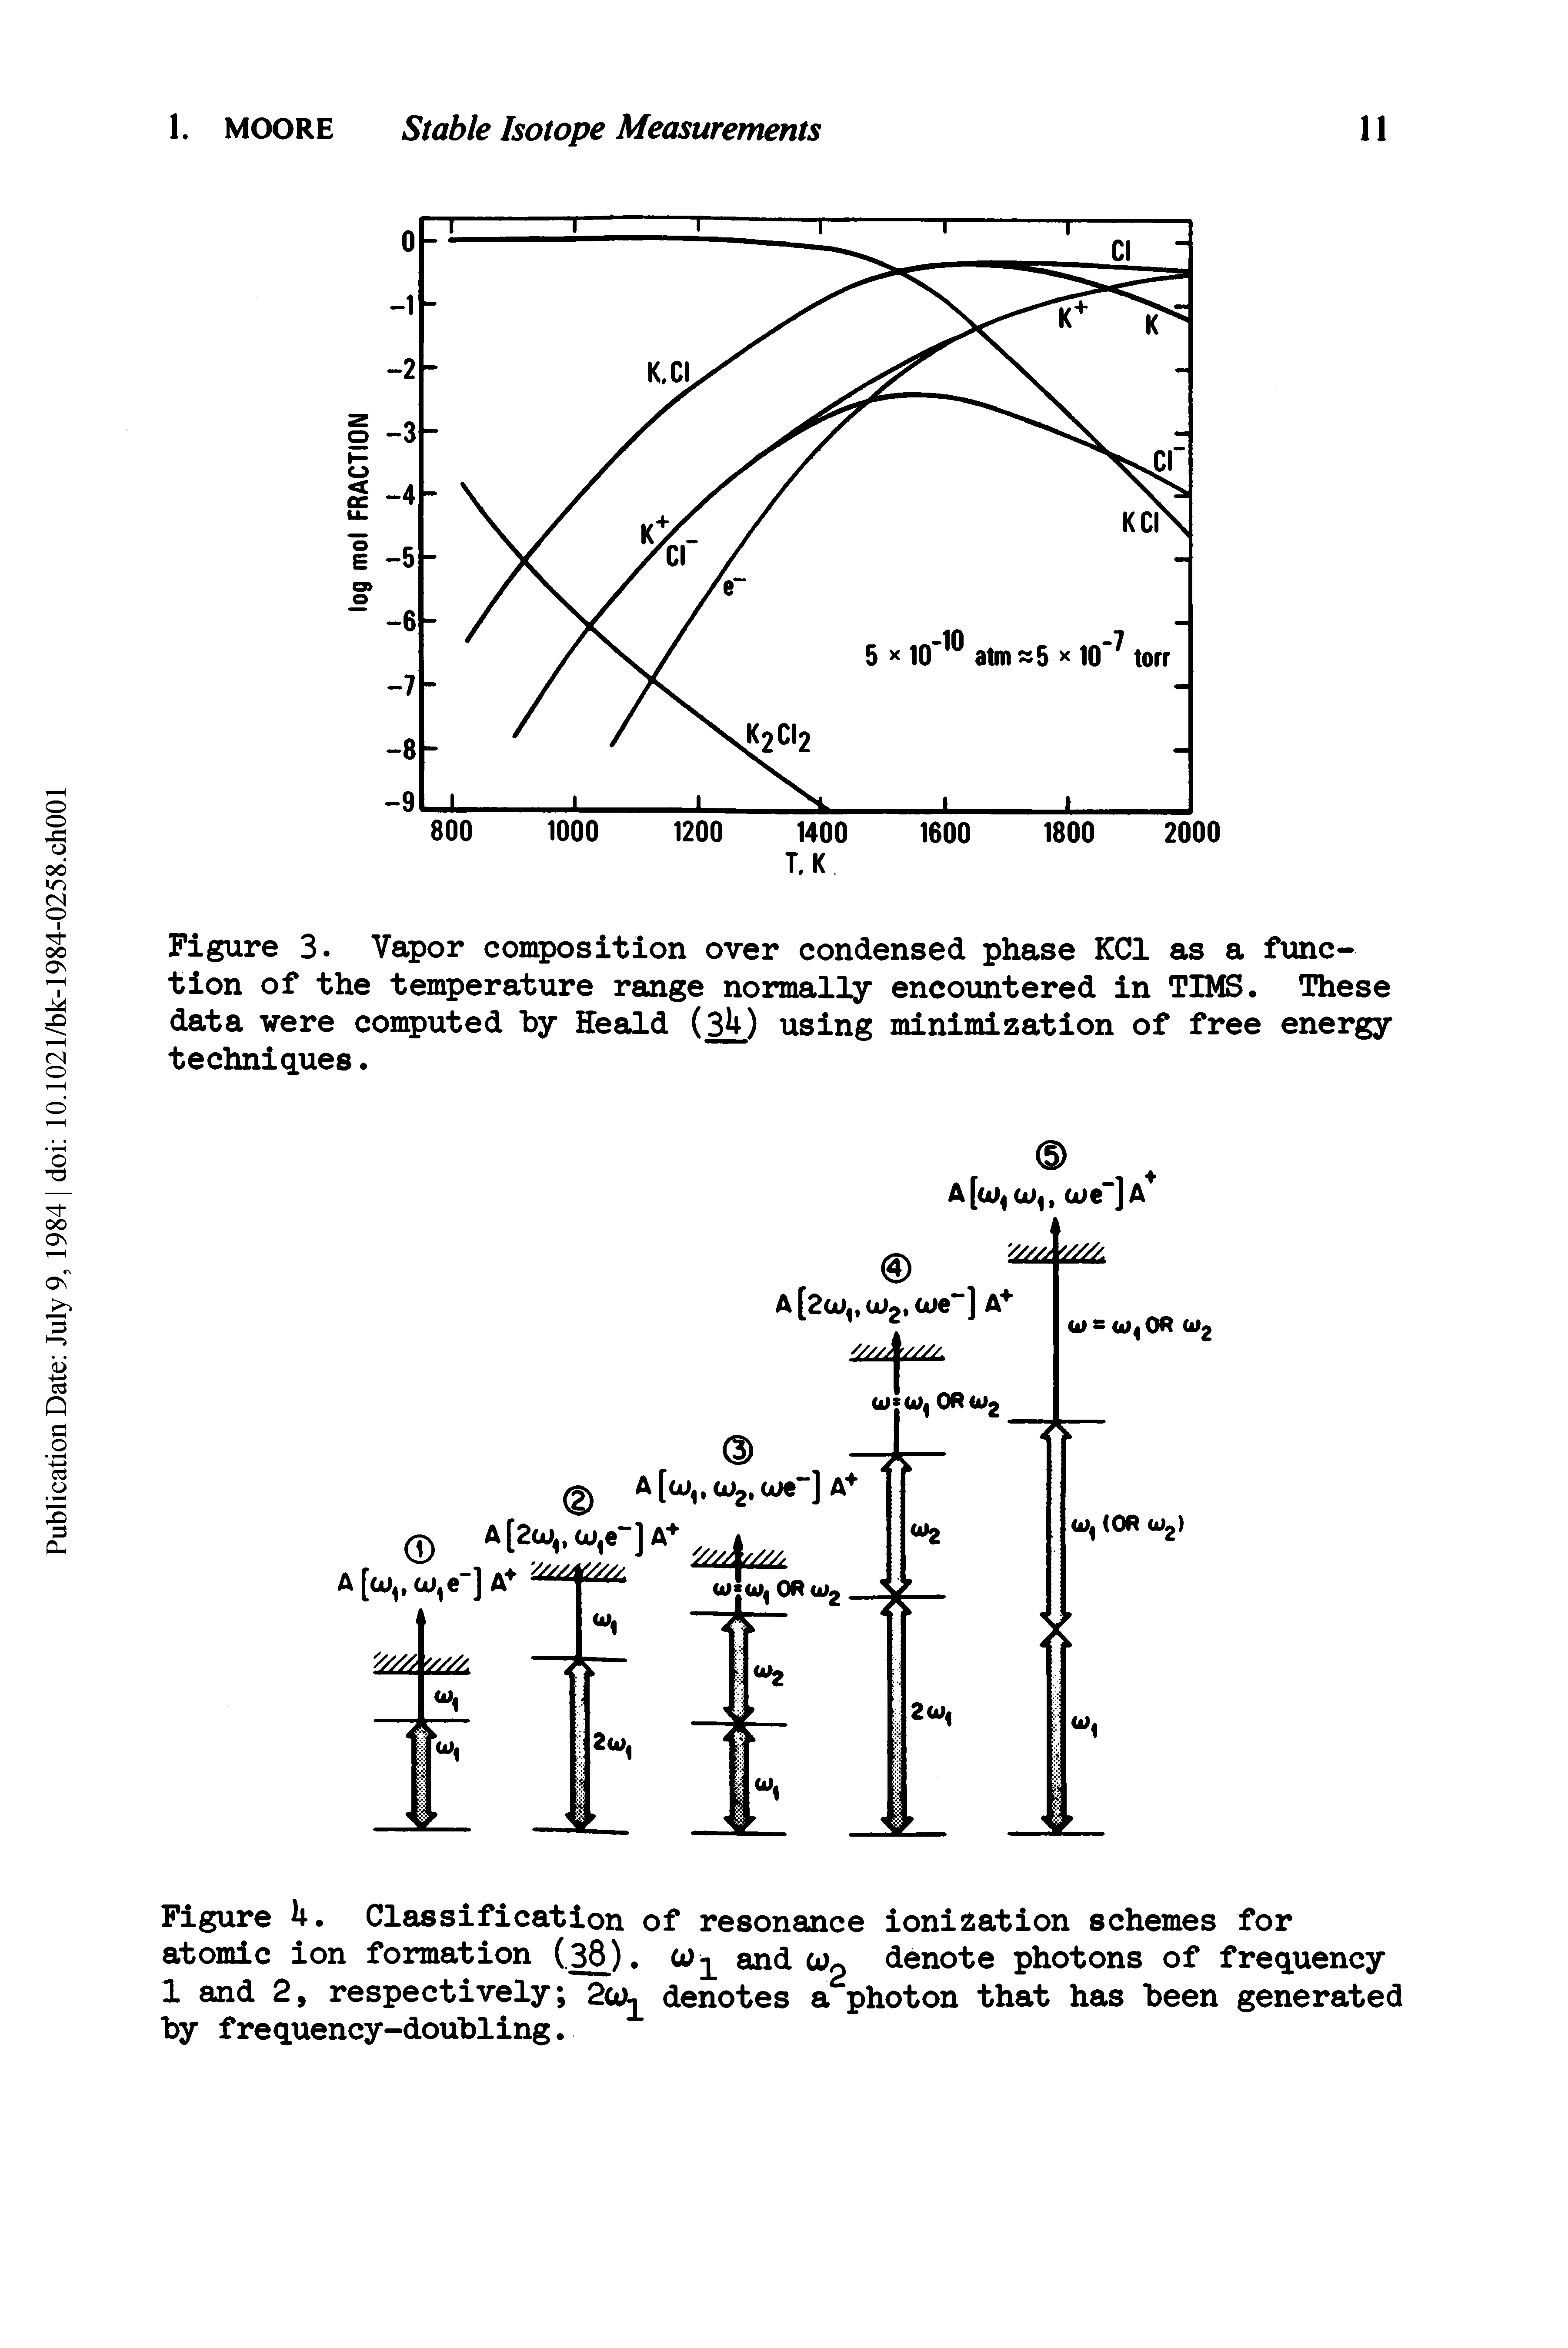 Figure U. Classification of resonance ionization schemes for atomic ion formation (38). and cOp denote photons of frequency 1 and 2, respectively 2co denotes a photon that has been generated by frequency-doubling.